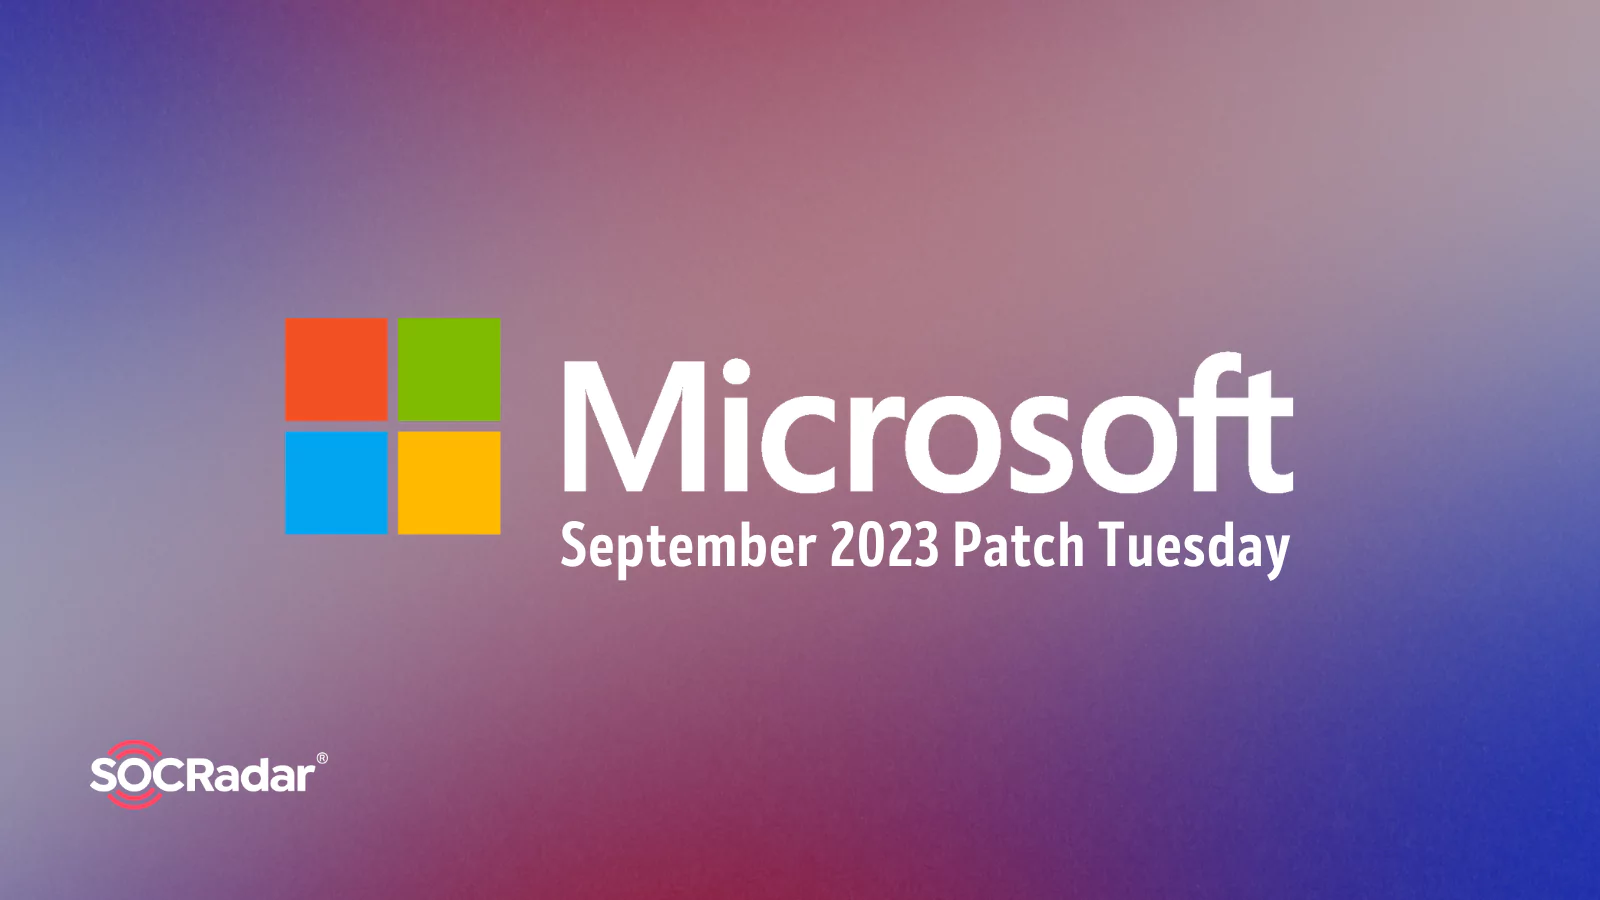 SOCRadar® Cyber Intelligence Inc. | September 2023 Patch Tuesday by Microsoft Fixes Five Critical, Two Zero-Day Vulnerabilities